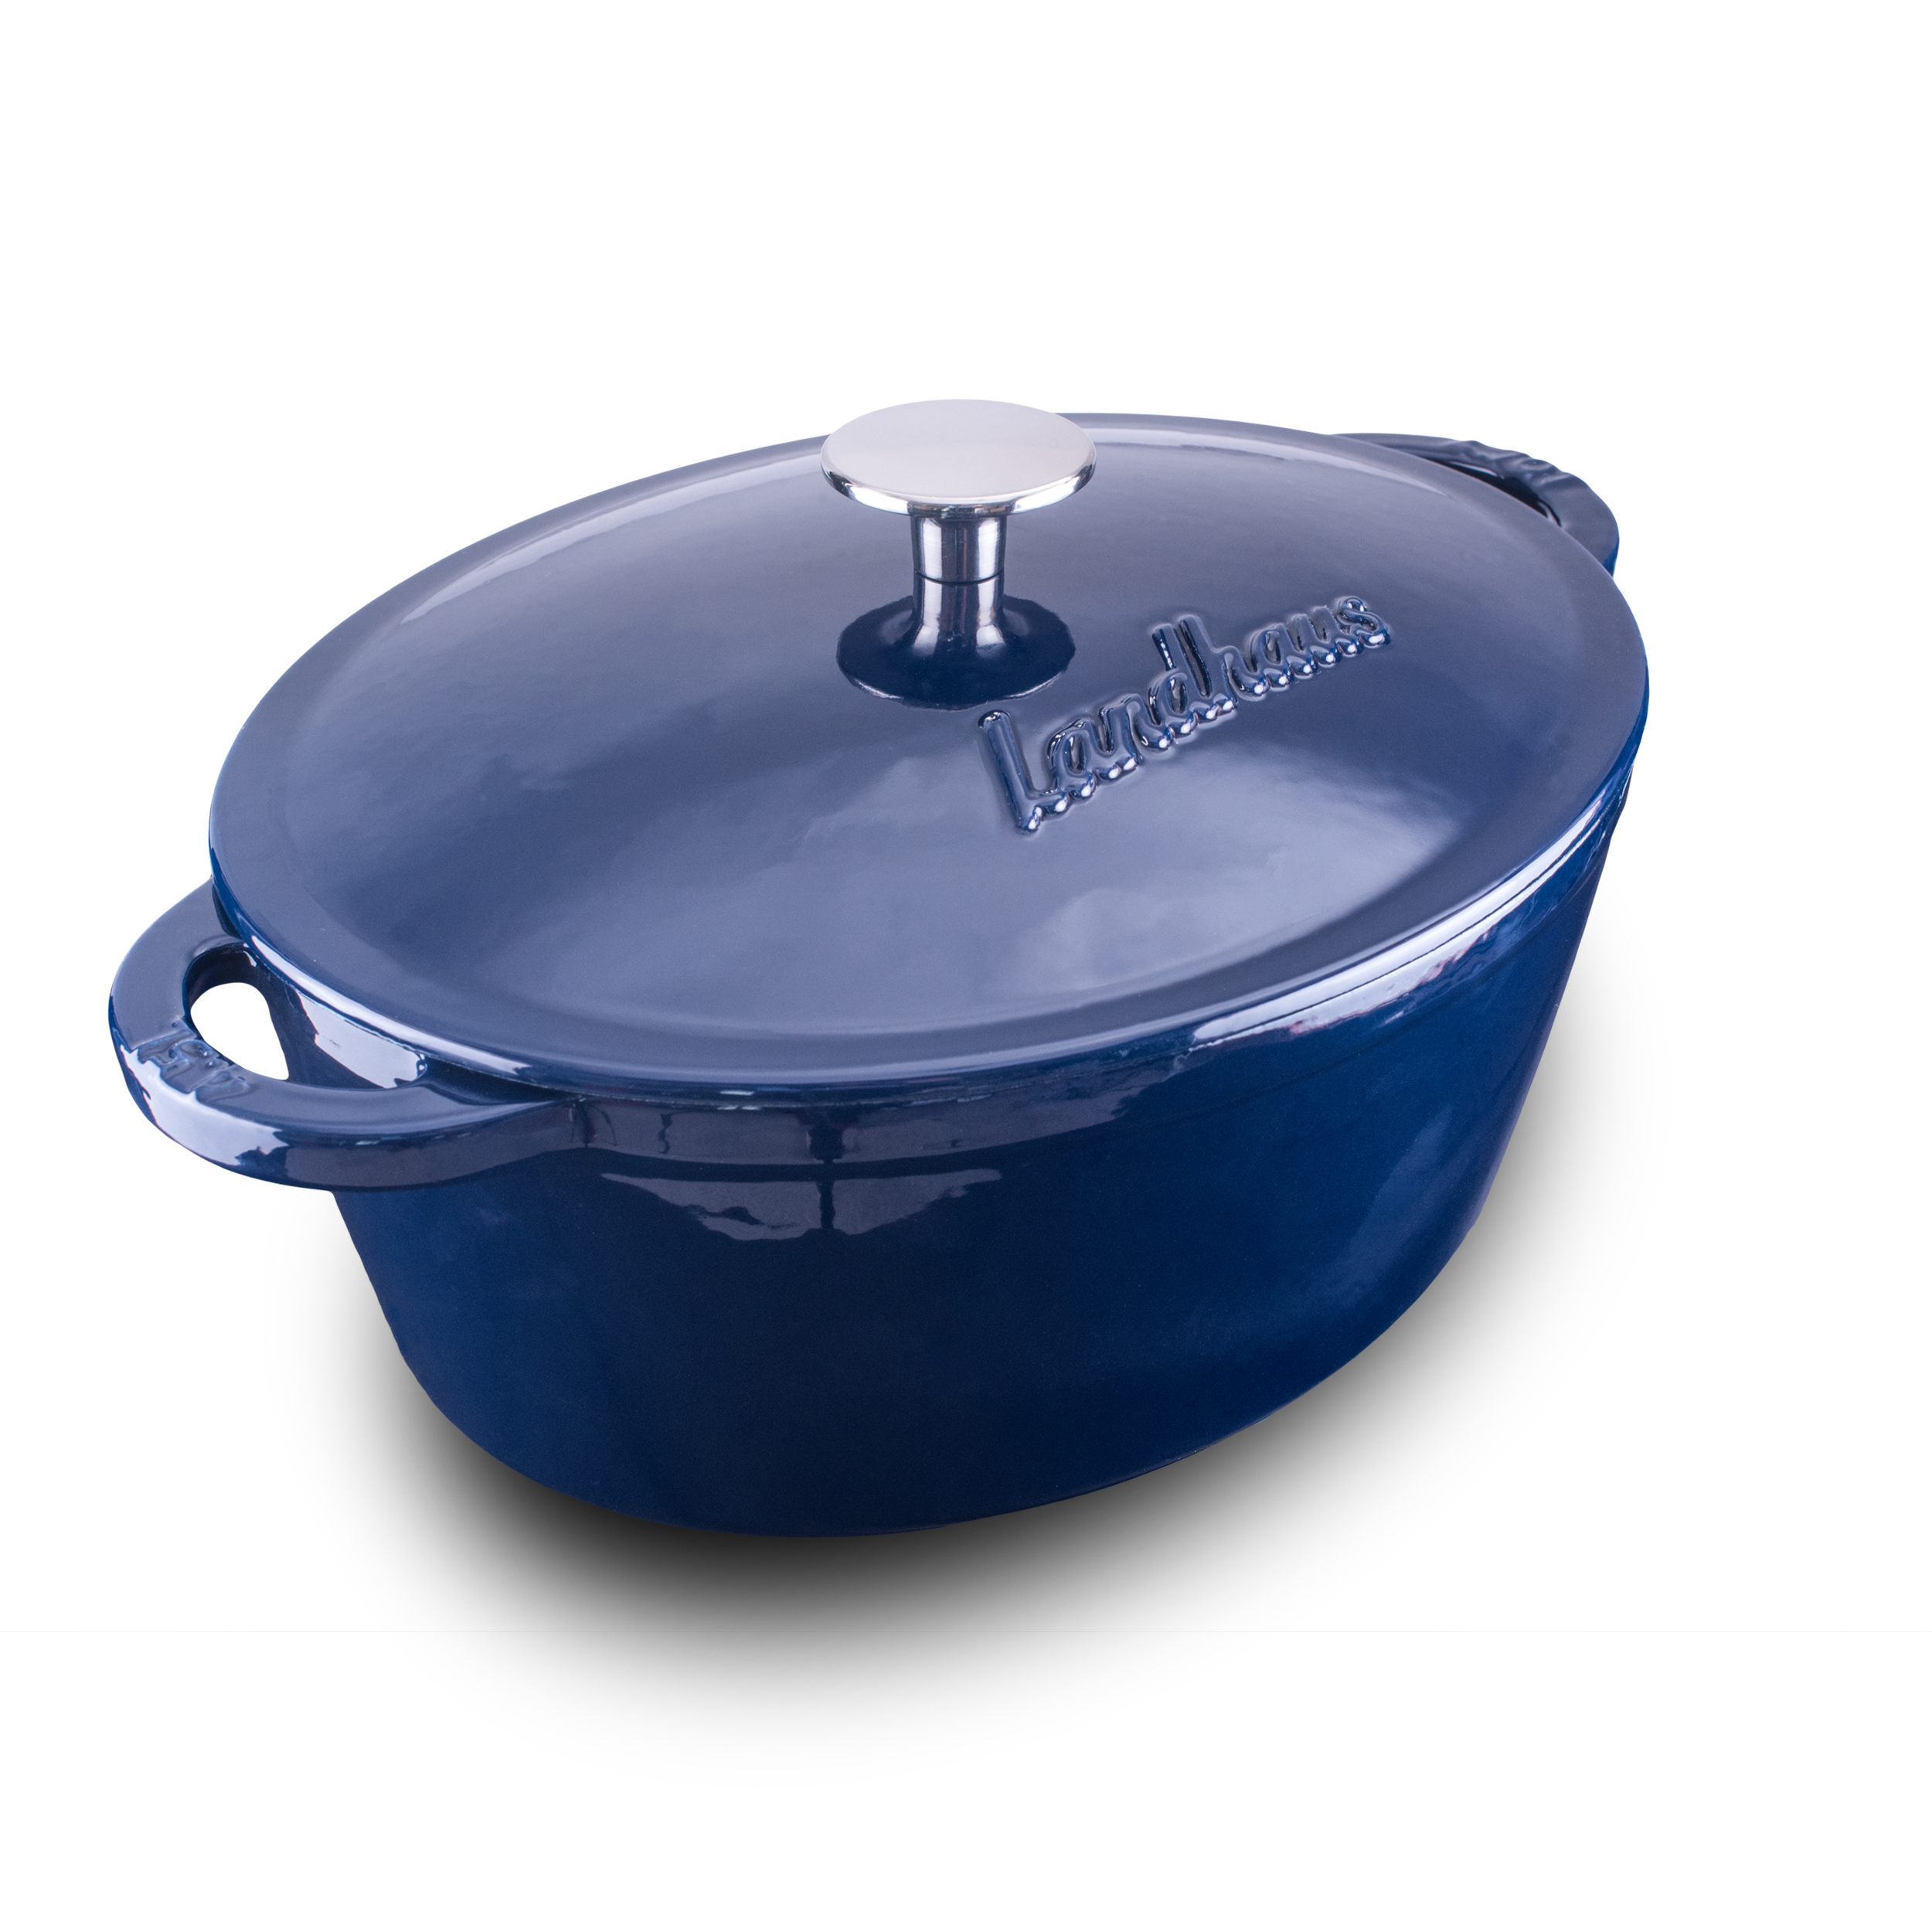 https://lhcookware.com/wp-content/uploads/2020/02/French-Oven-Square-Blue.jpg